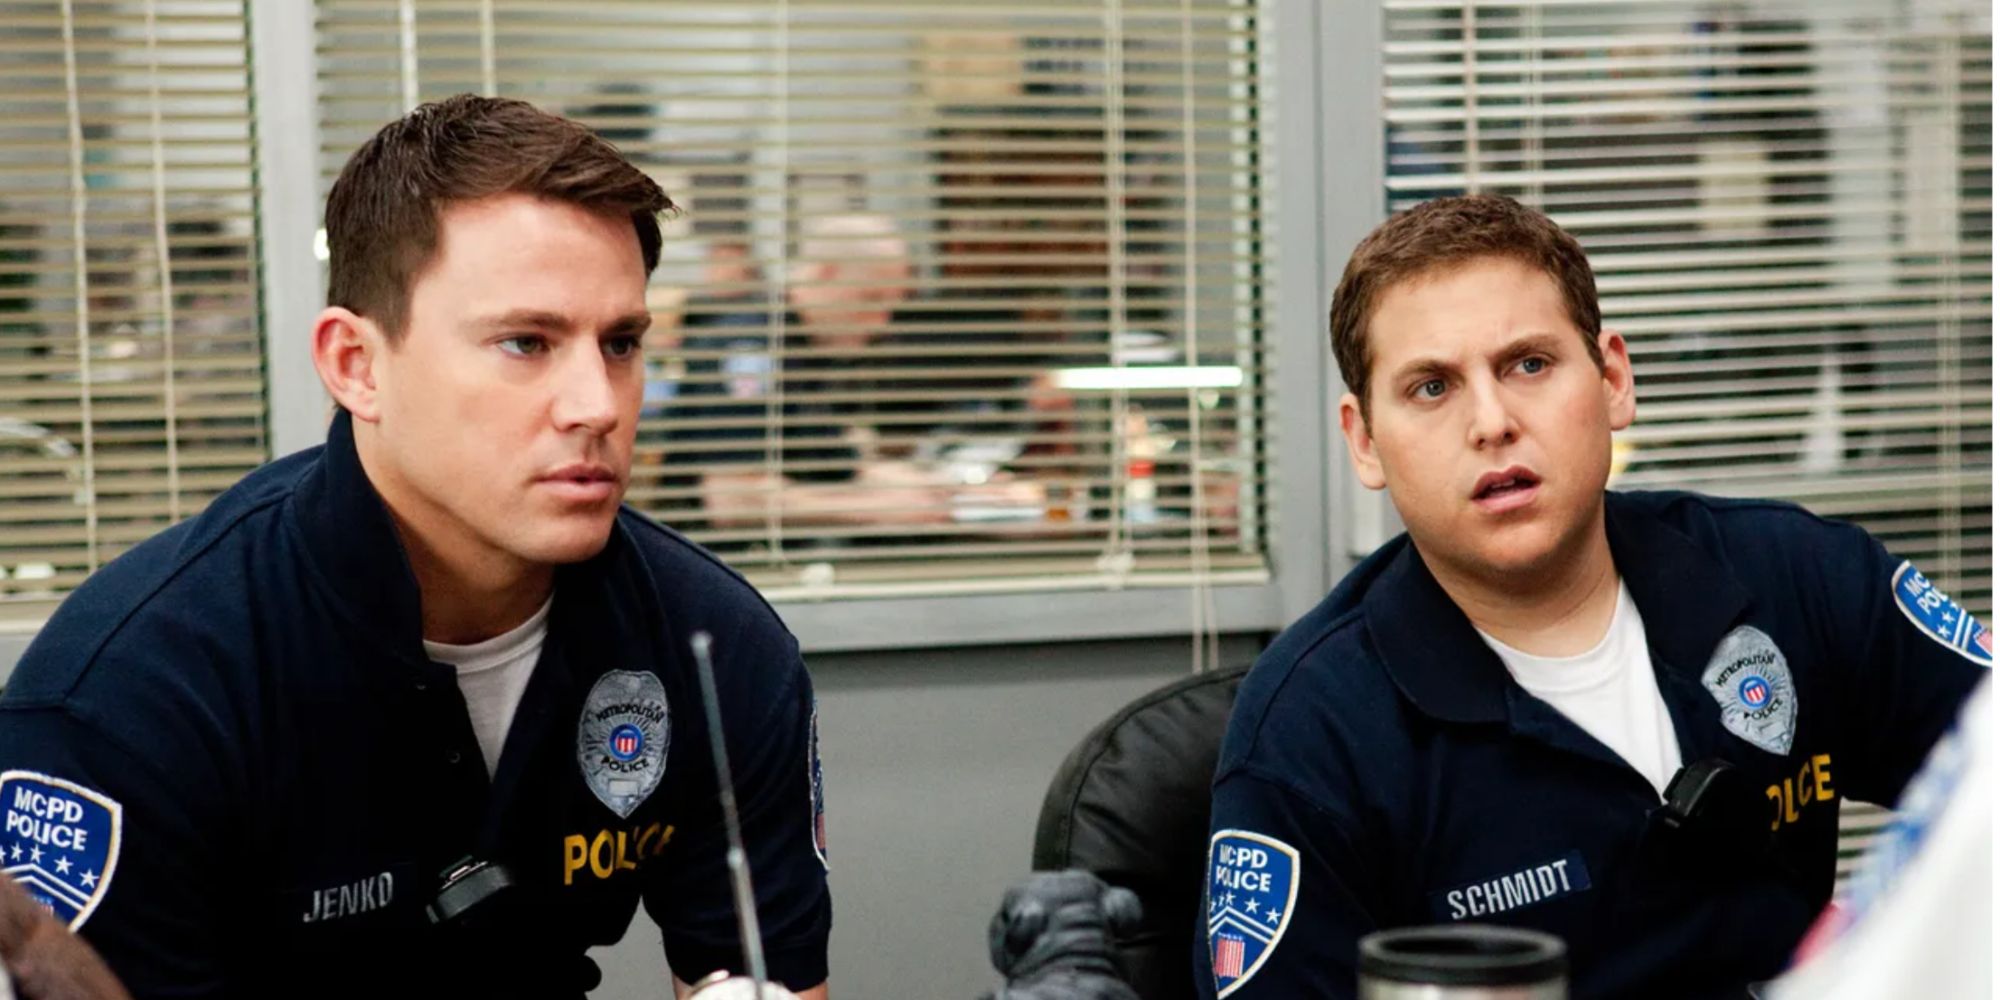 Channing Tatum and Jonah Hill staring at their Captain confused in 21 Jump Street